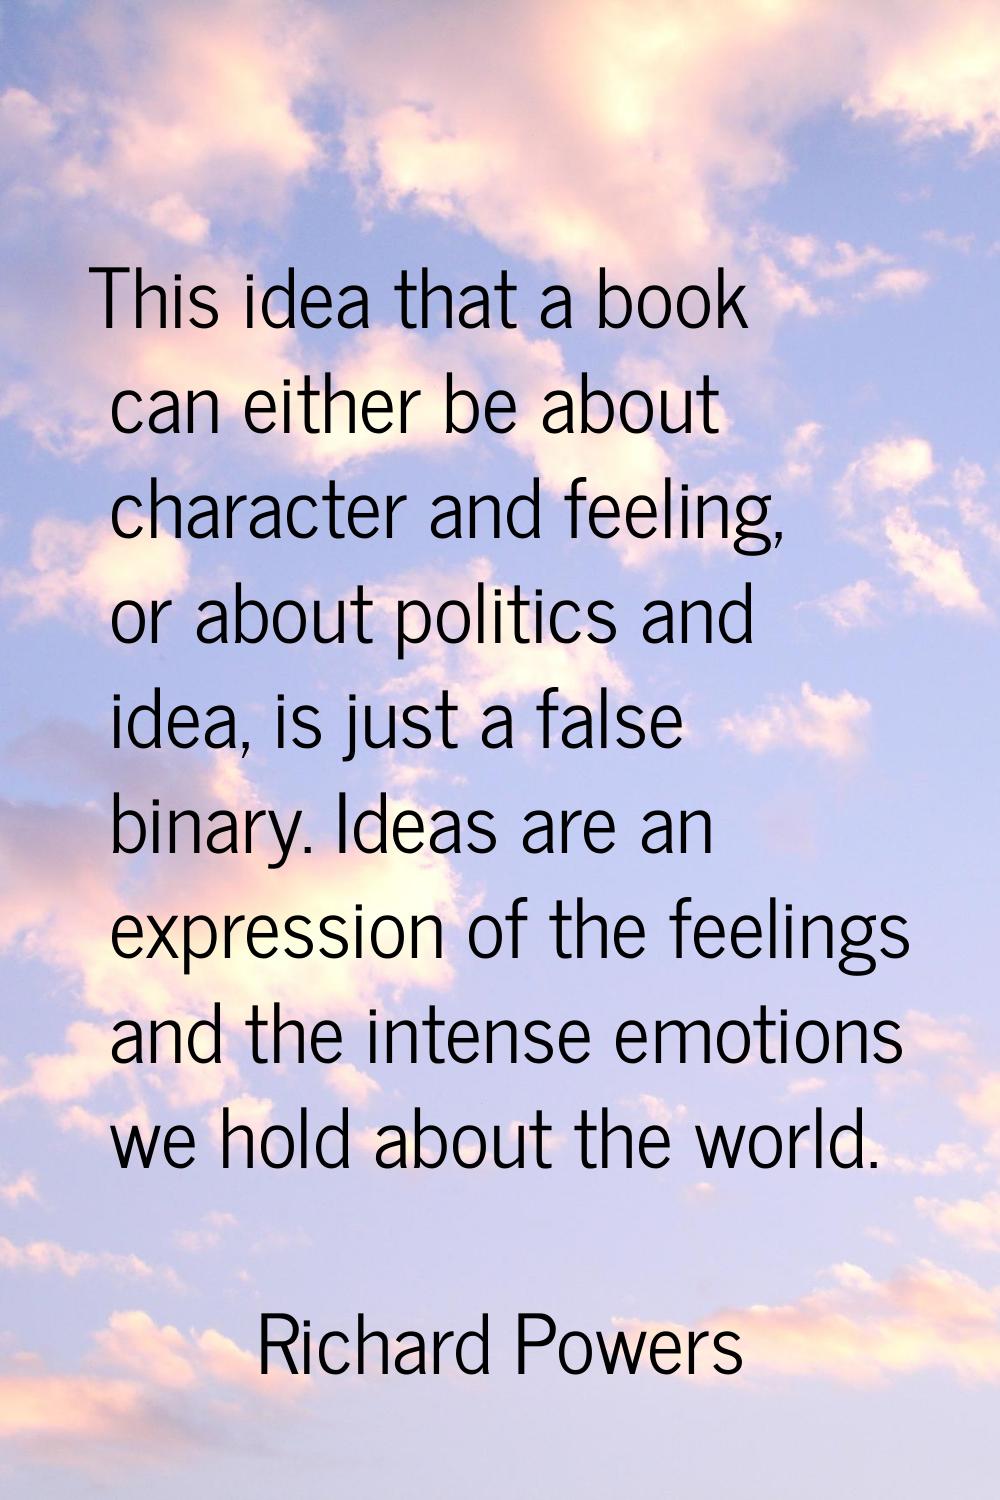 This idea that a book can either be about character and feeling, or about politics and idea, is jus